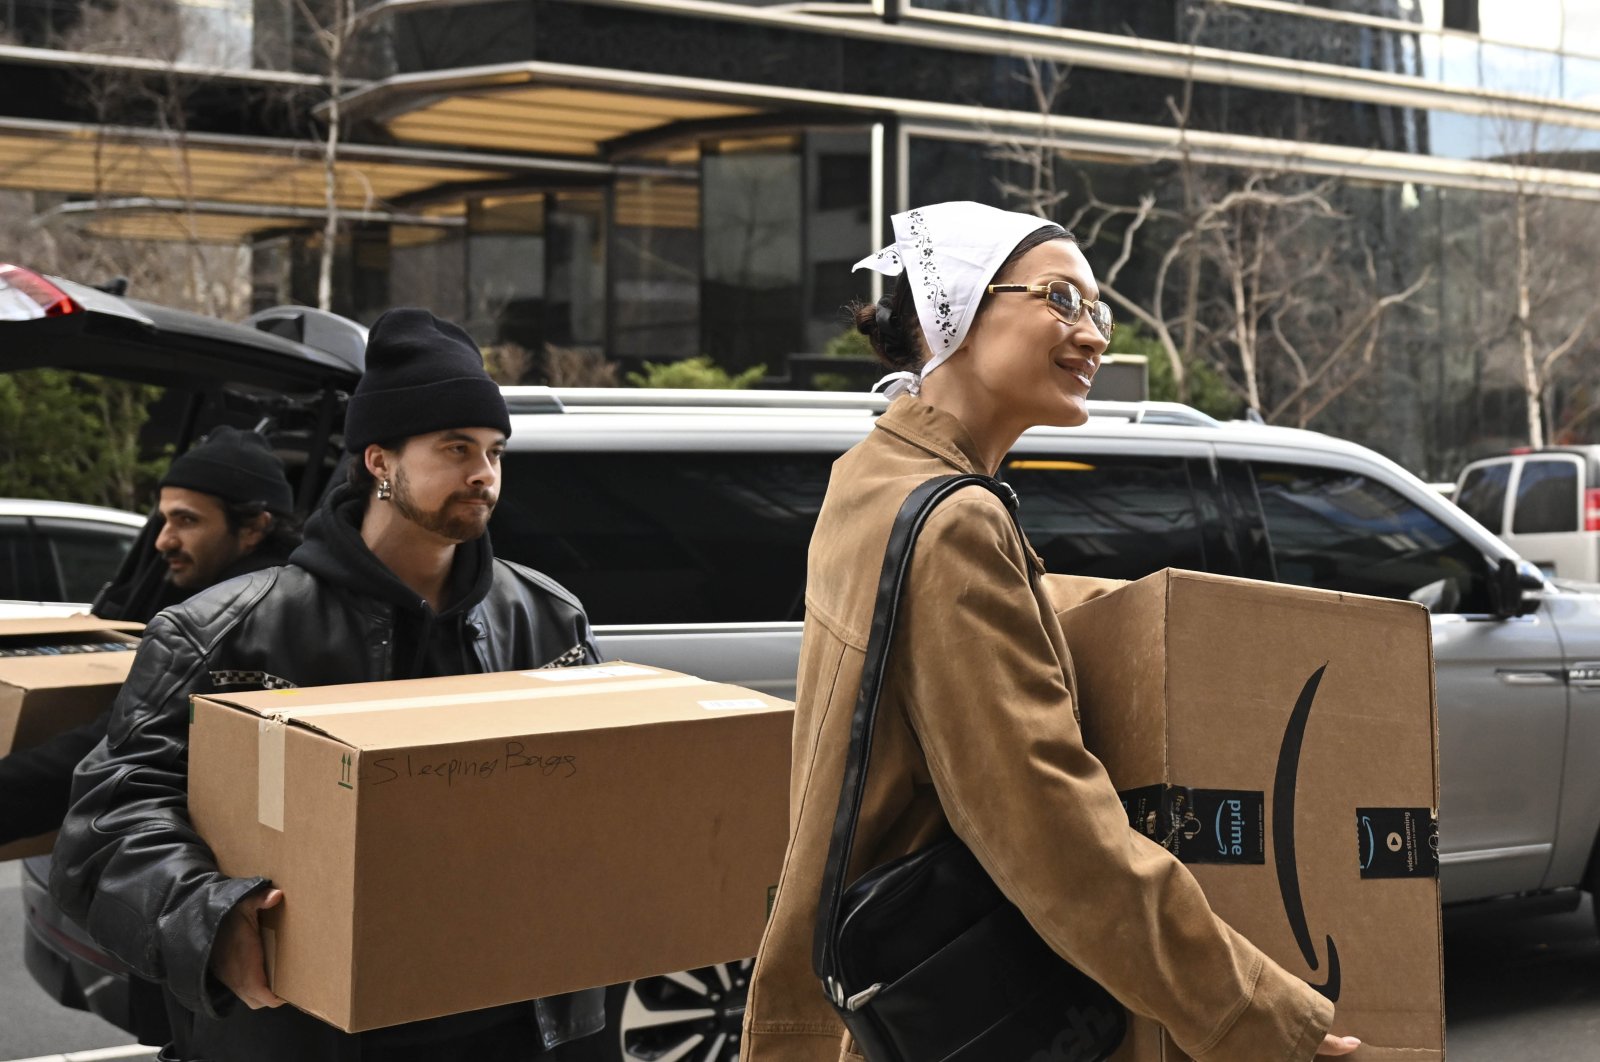 Supermodel Bella Hadid smiles as she carries a box filled with humanitarian aid supplies for Turkish earthquake survivors in New York, U.S., Feb. 24, 2023. (AA Photo)